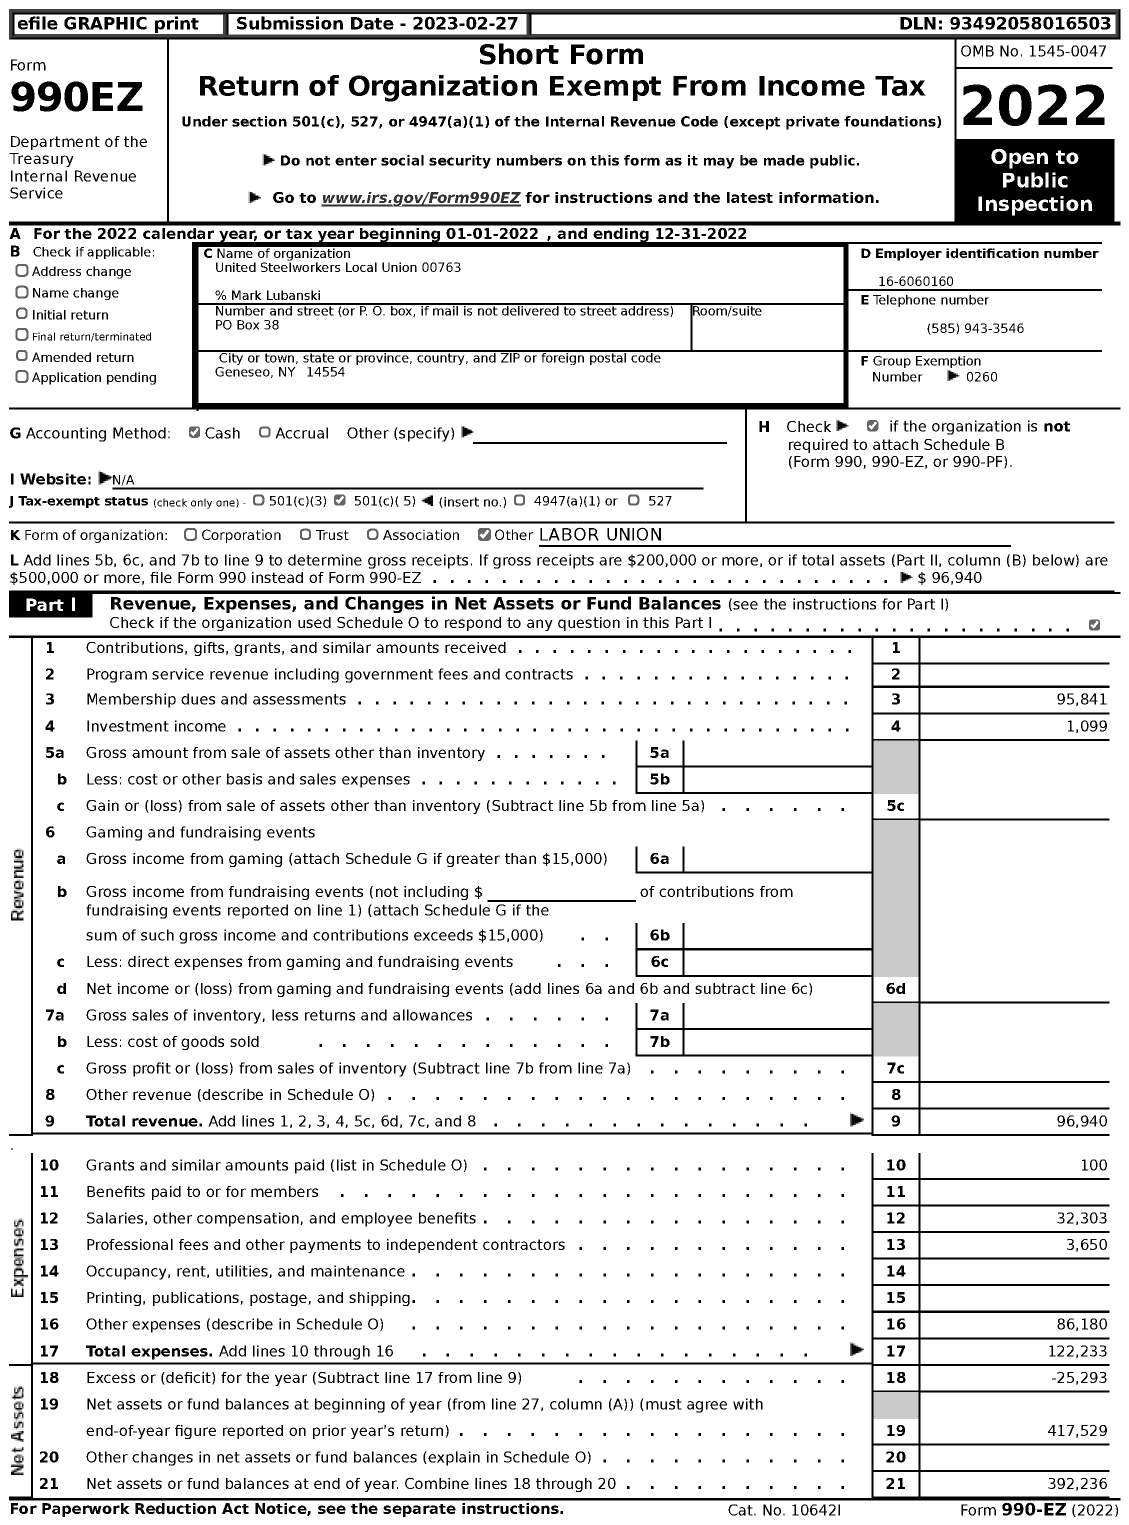 Image of first page of 2022 Form 990EZ for United Steelworkers - 00763 Local